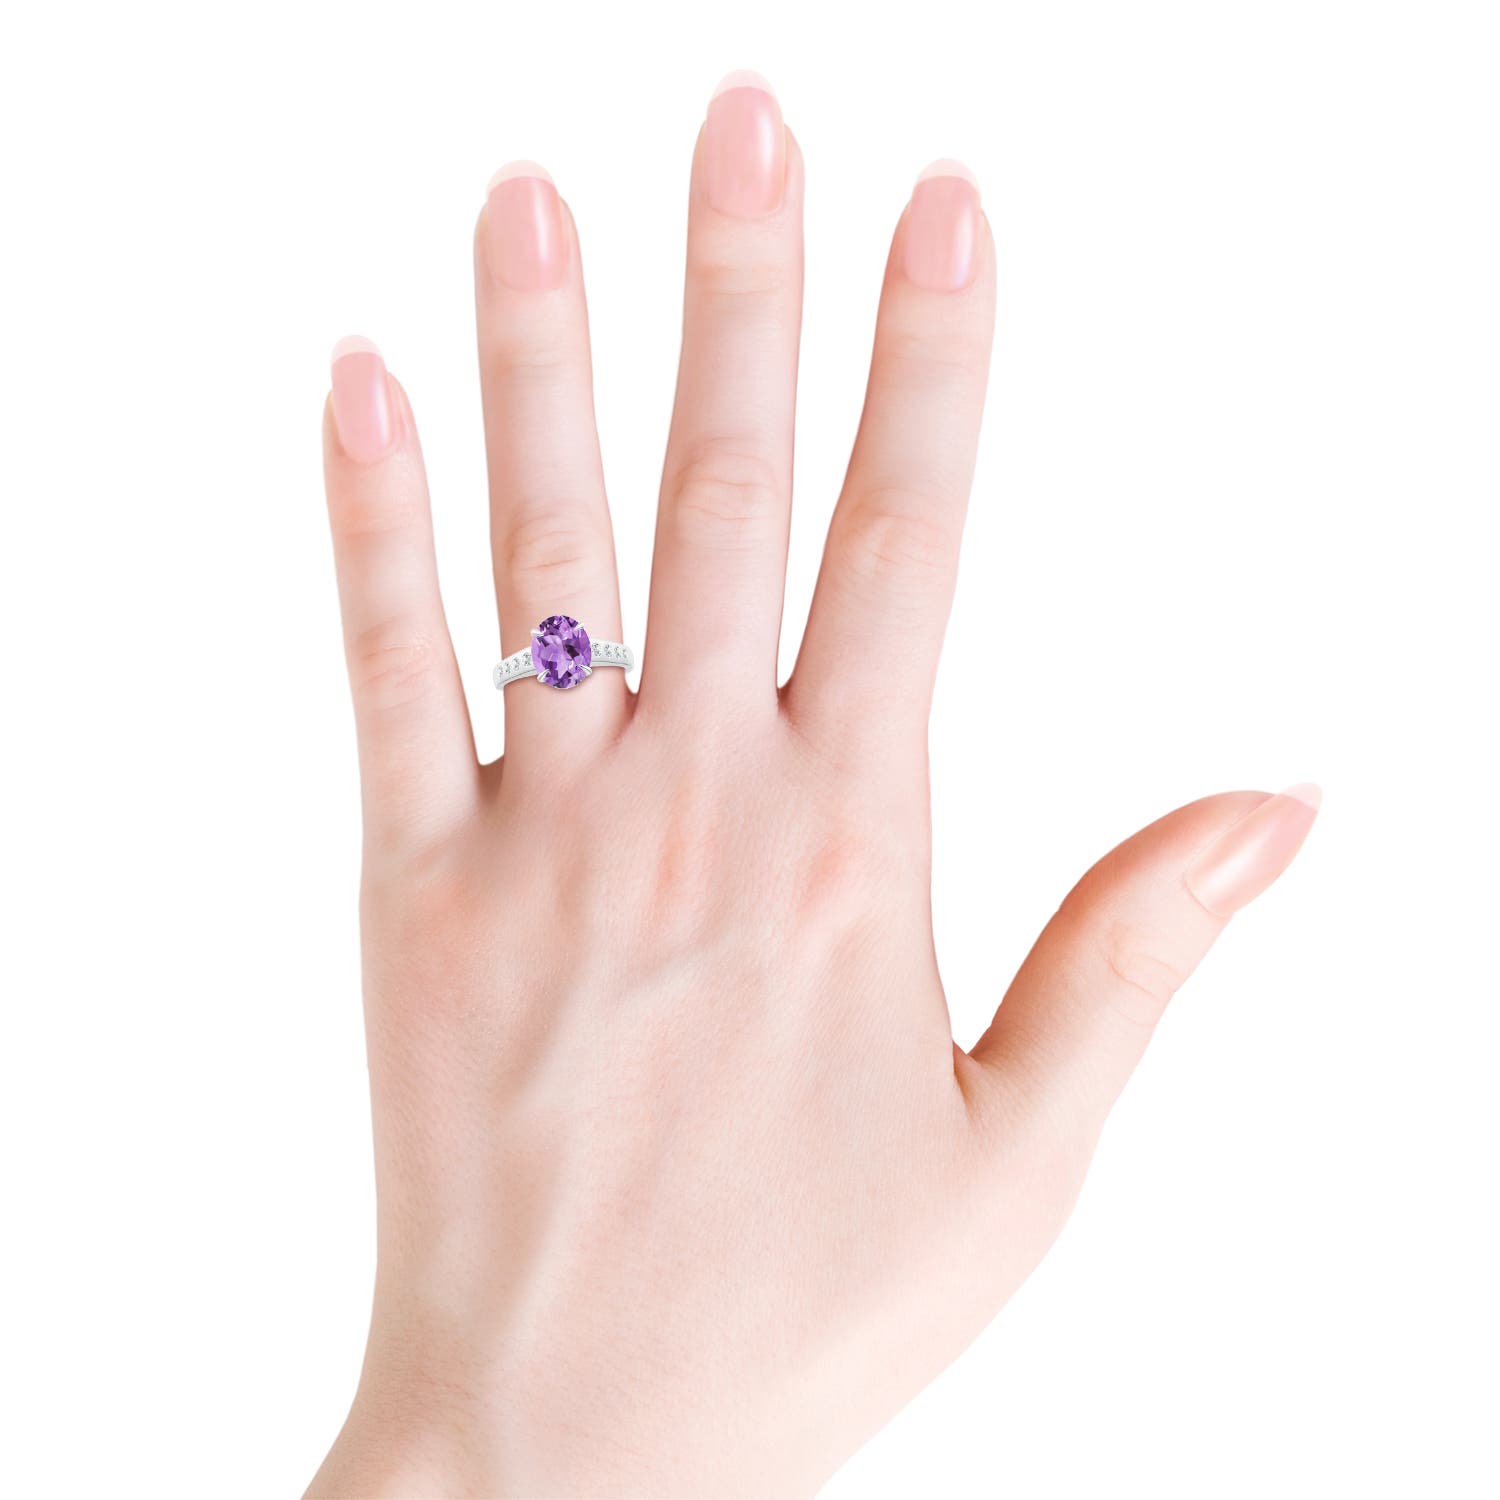 A - Amethyst / 2.5 CT / 14 KT White Gold